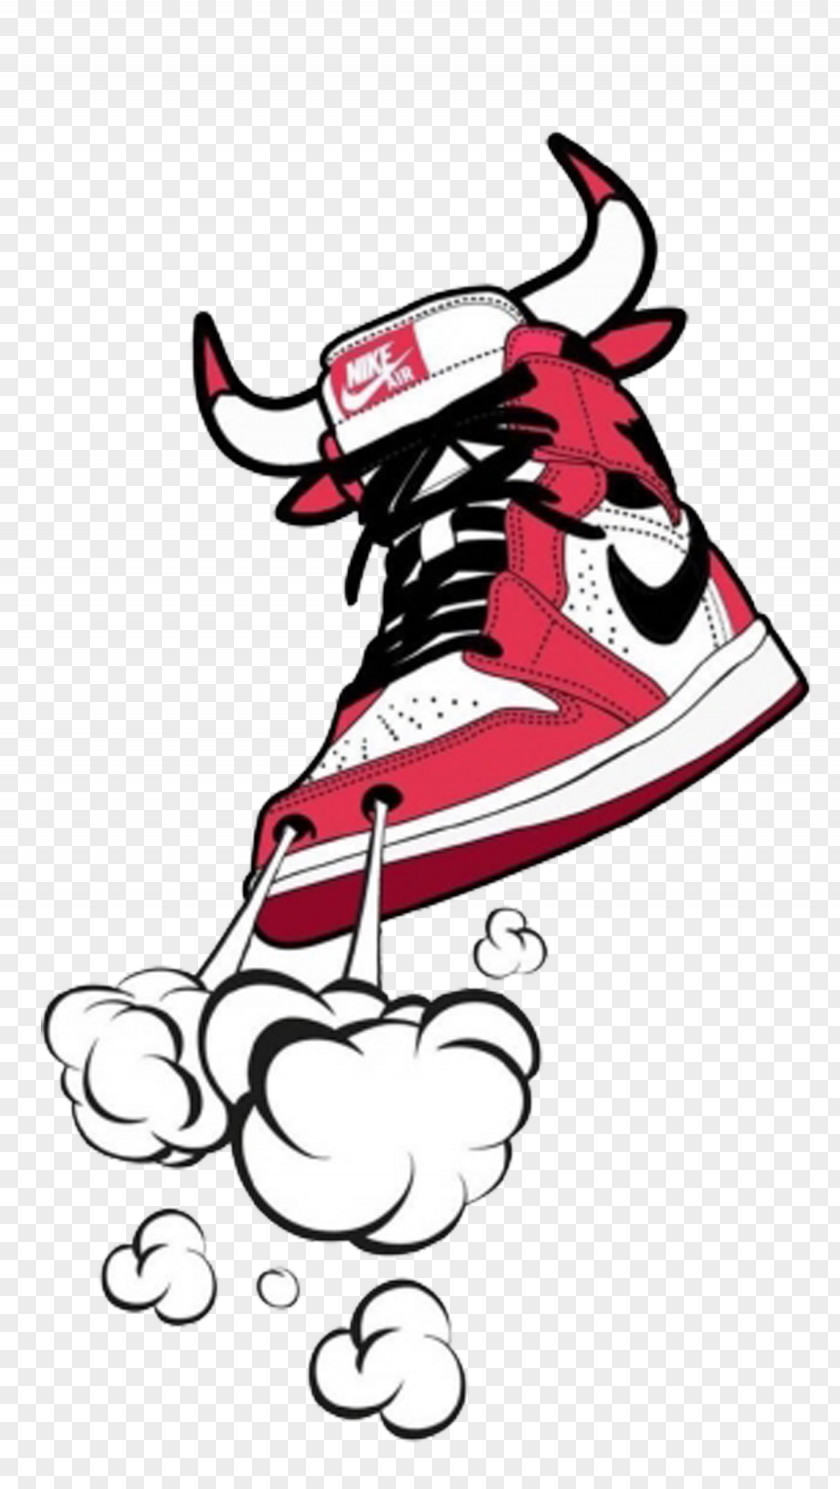 Decorative Shoes Cattle Chicago Bulls Sneakers Illustration PNG